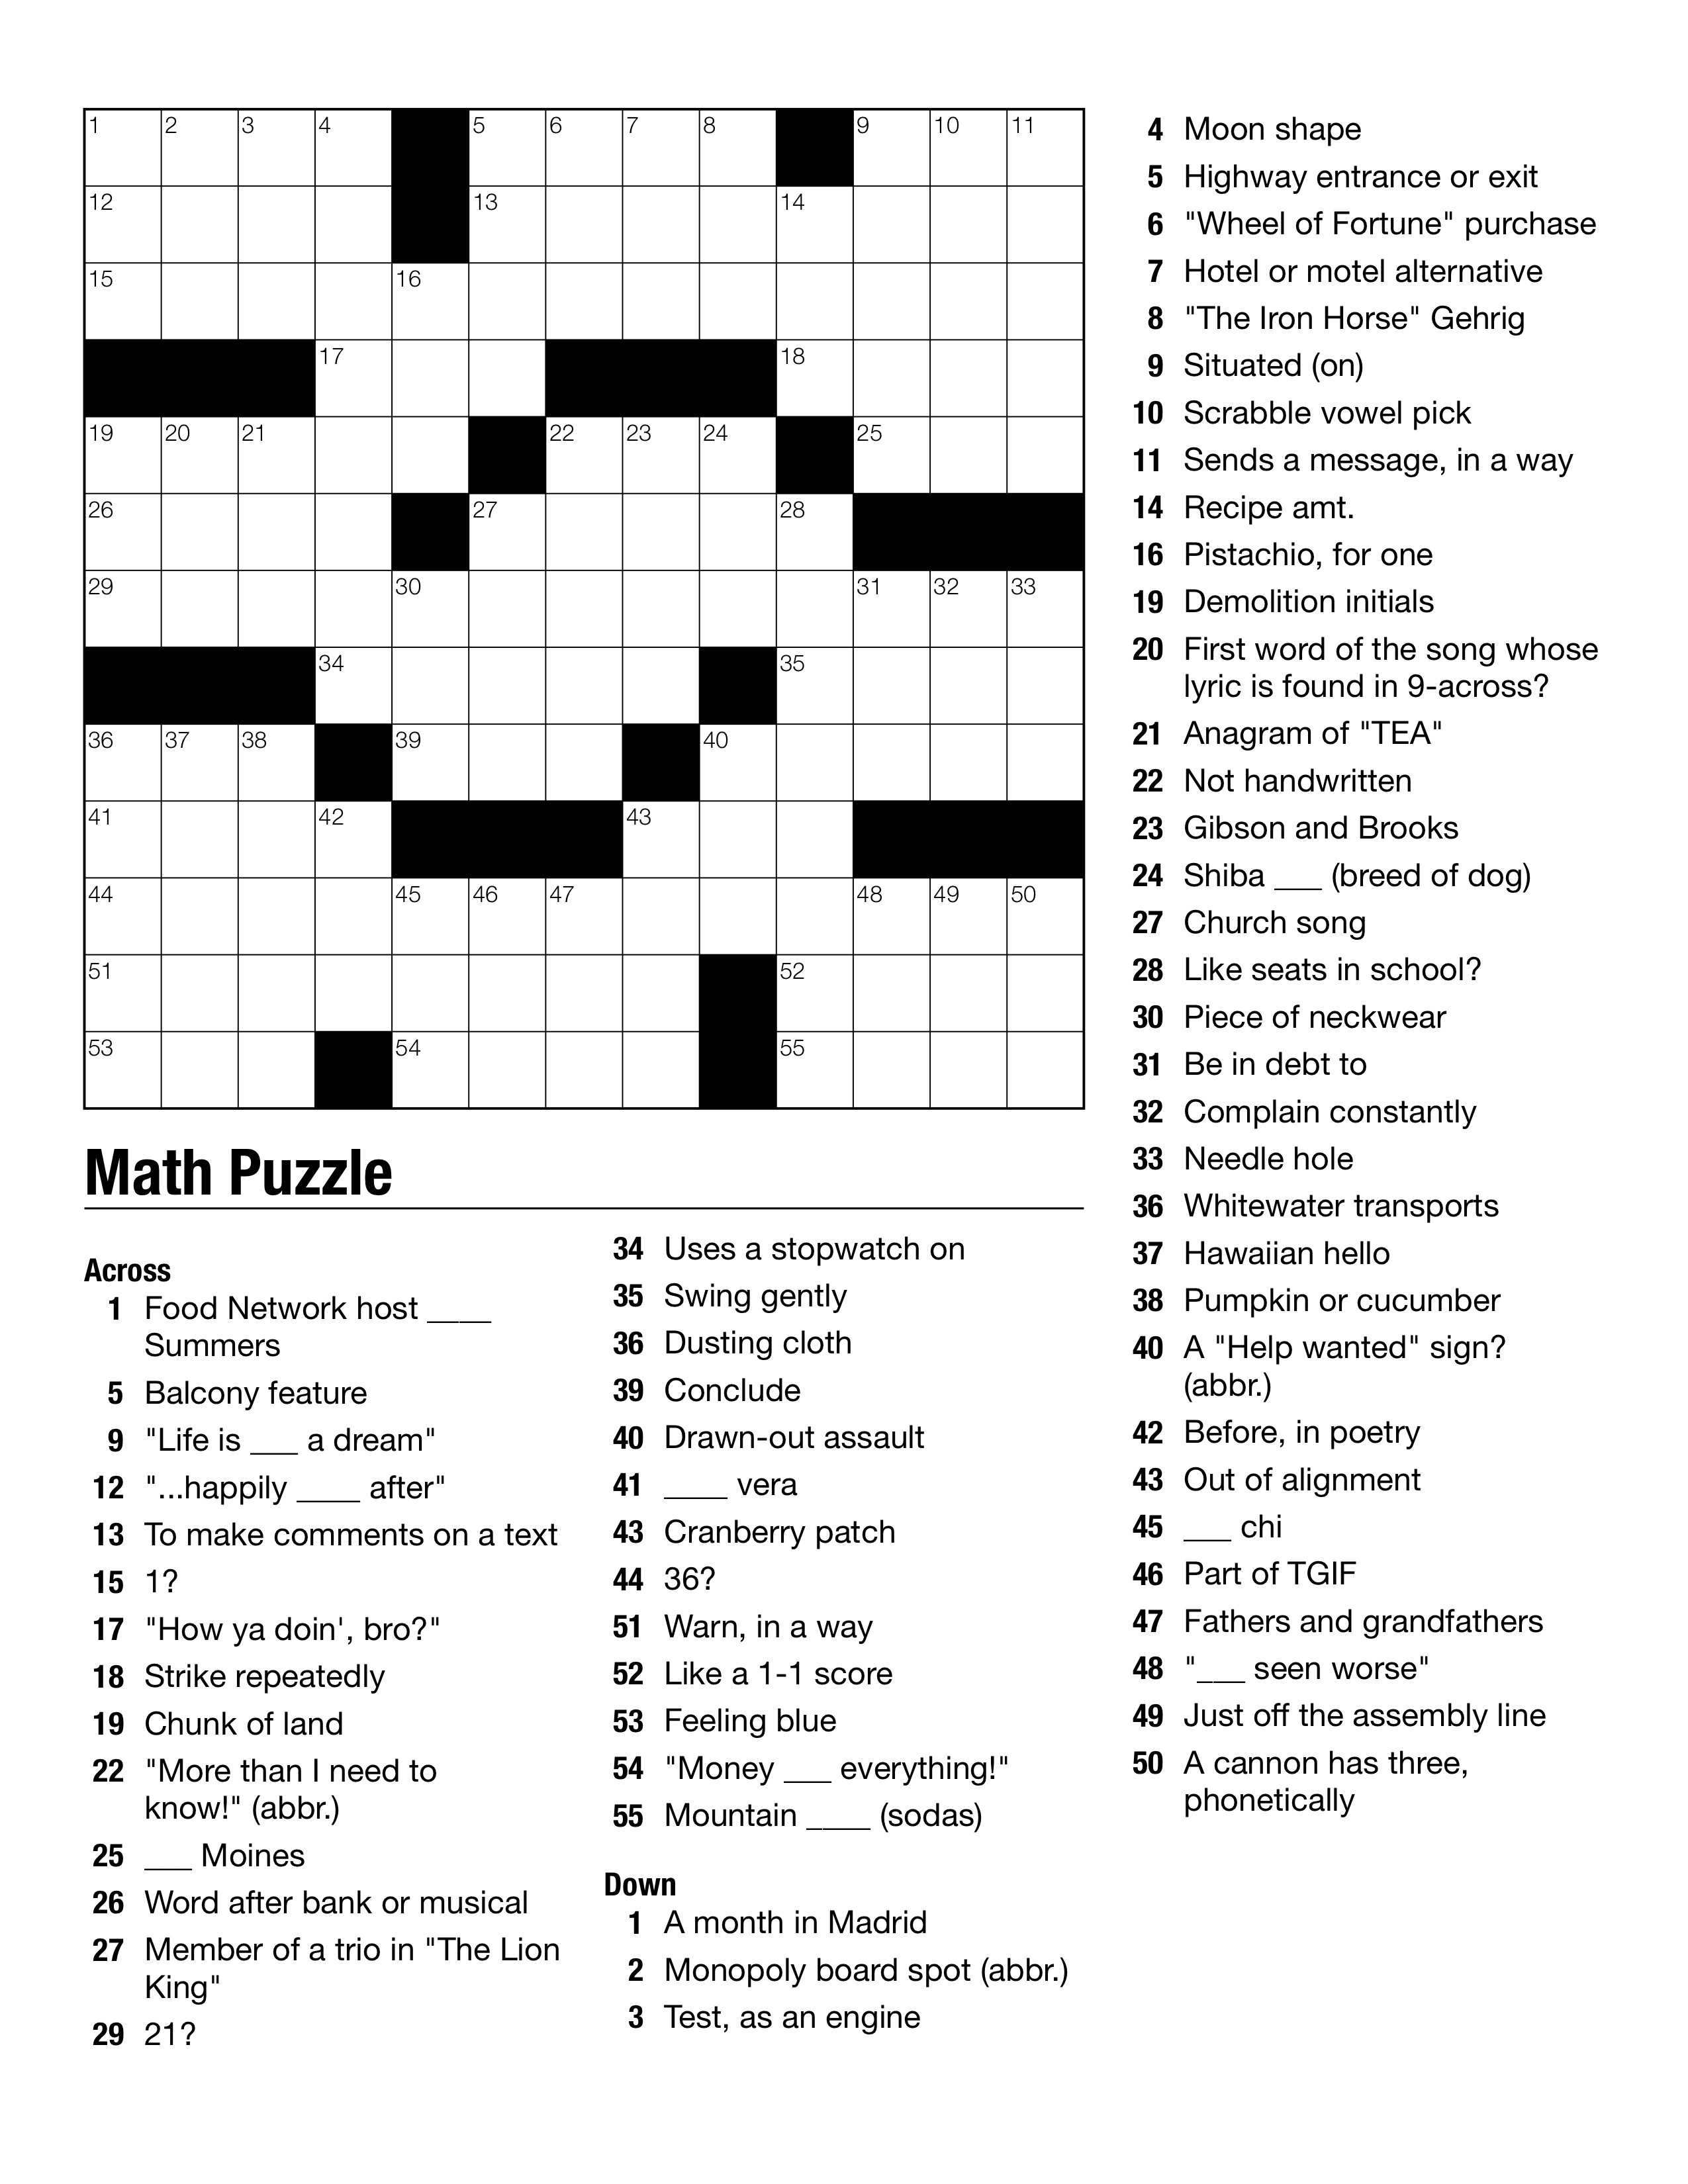 Pyramids Highest Point Daily Themed Crossword